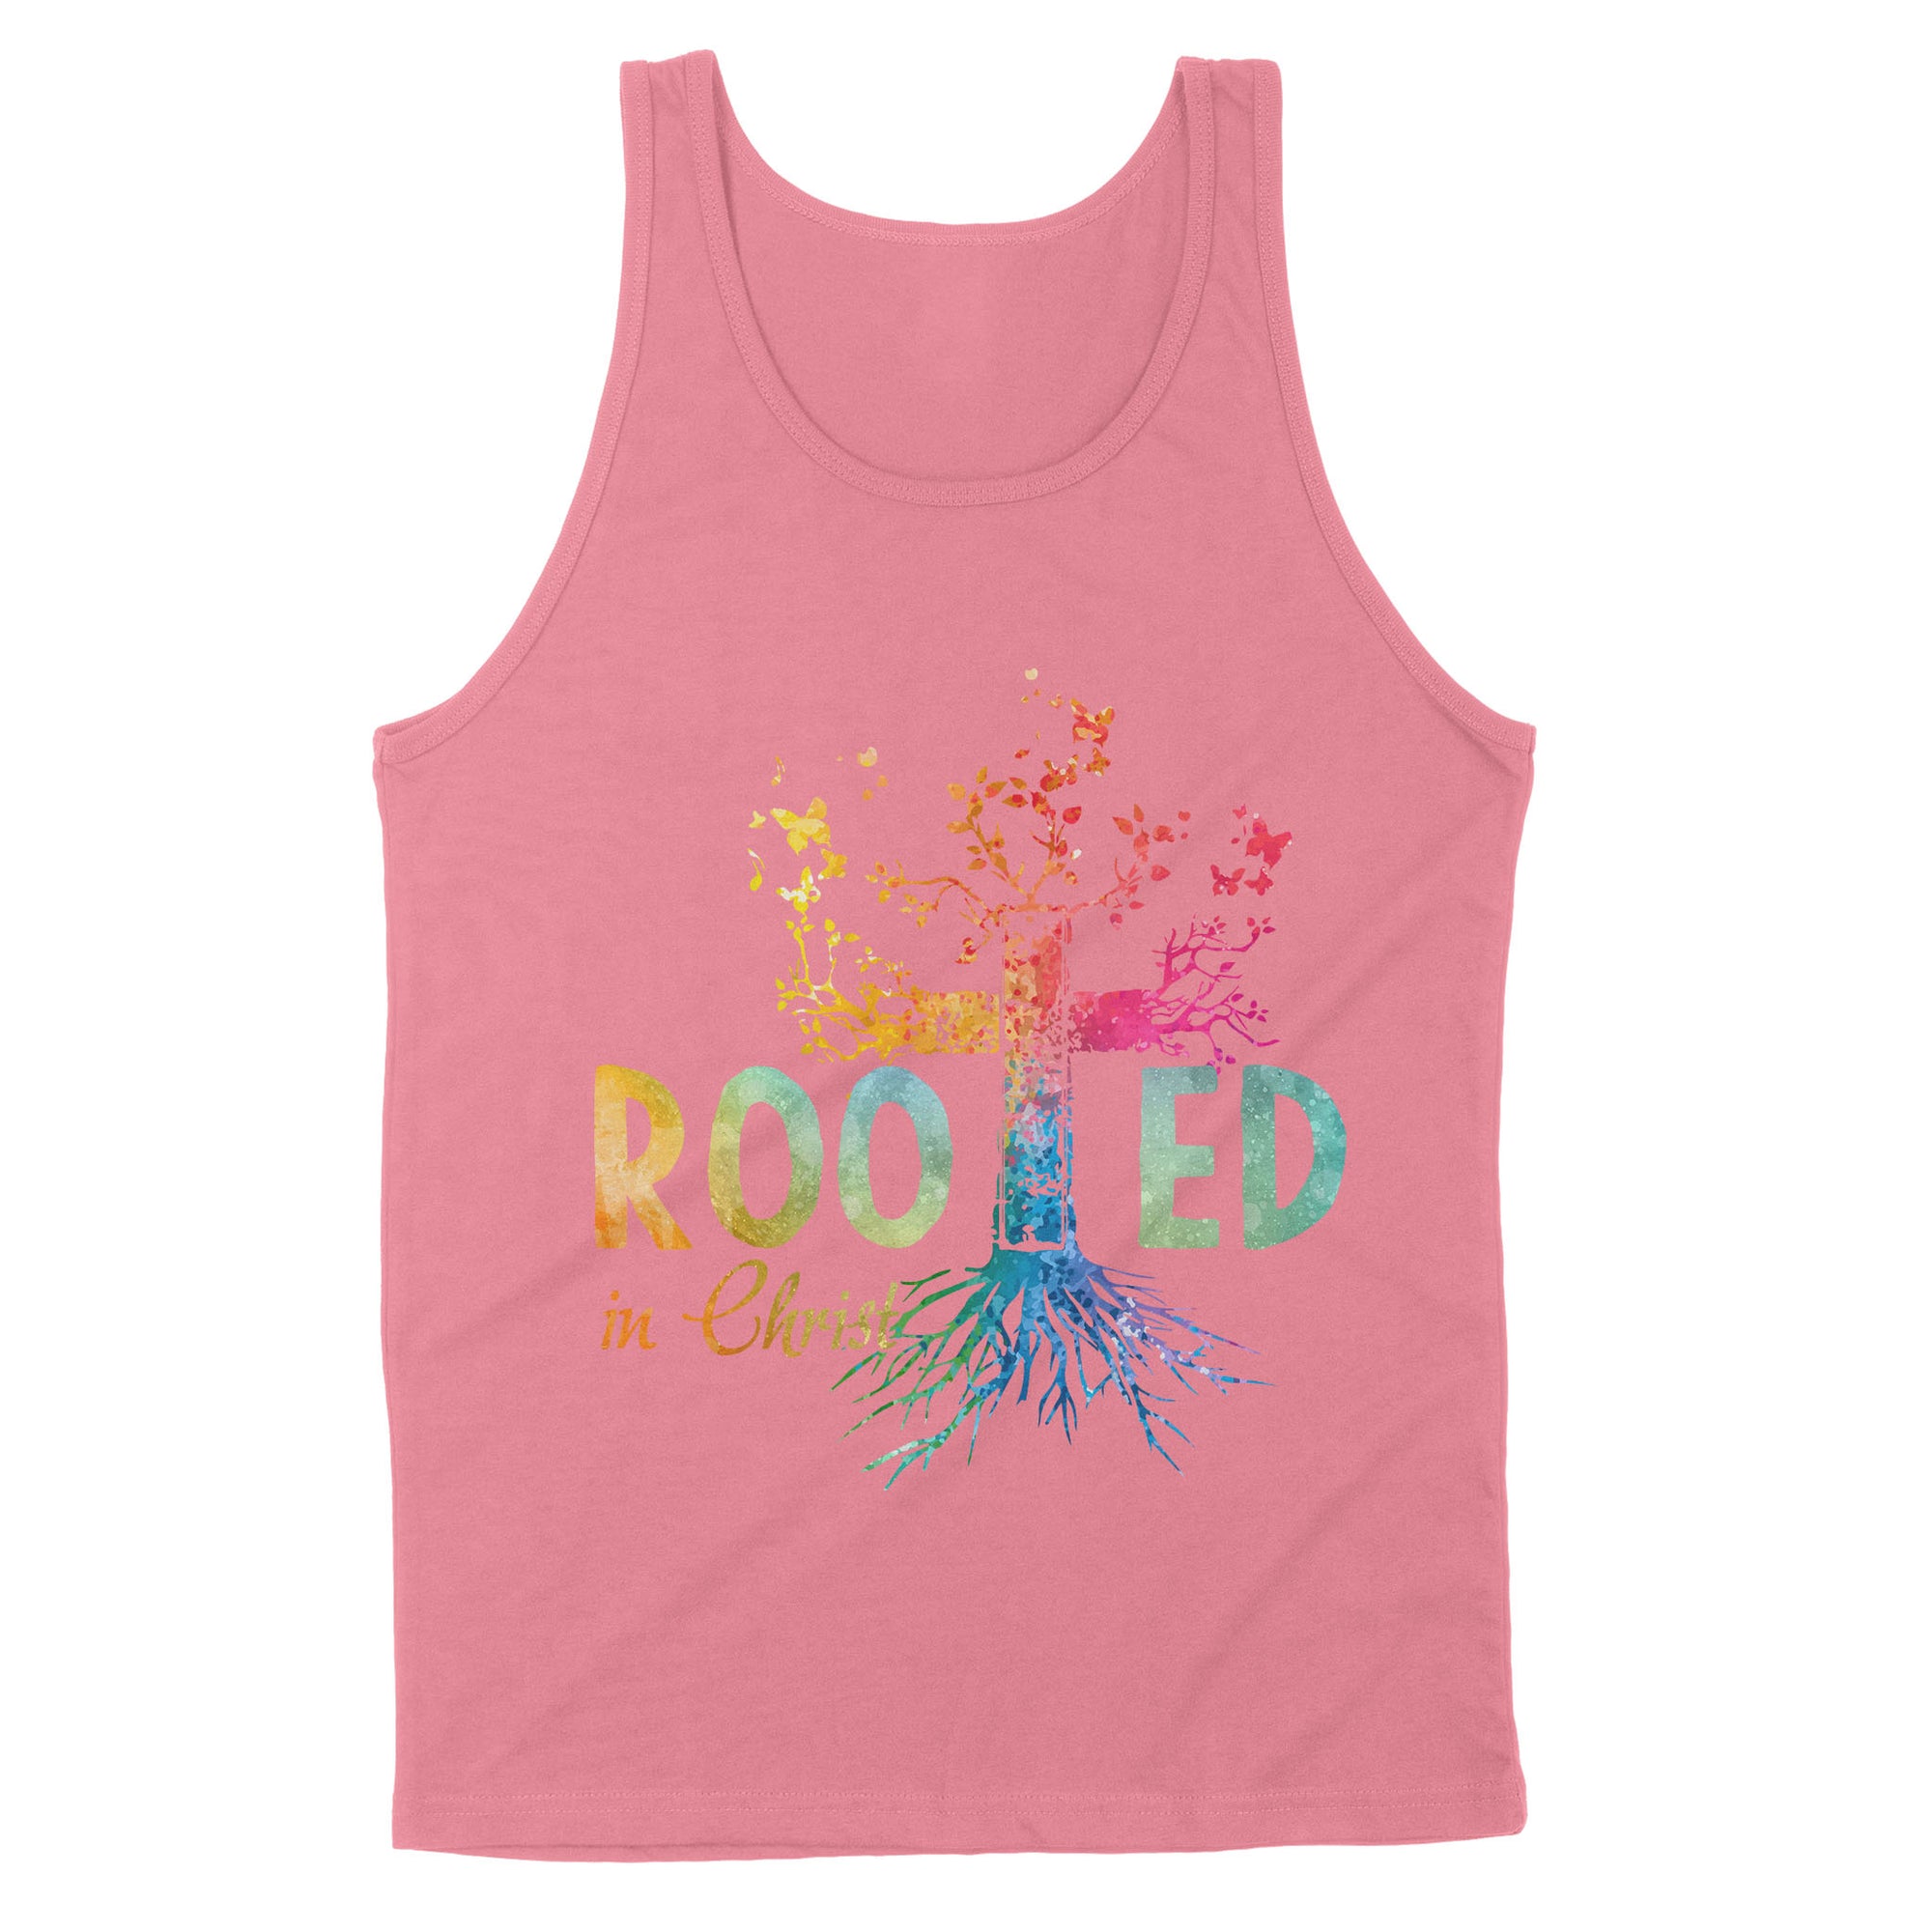 Rooted In Christ - Premium Tank